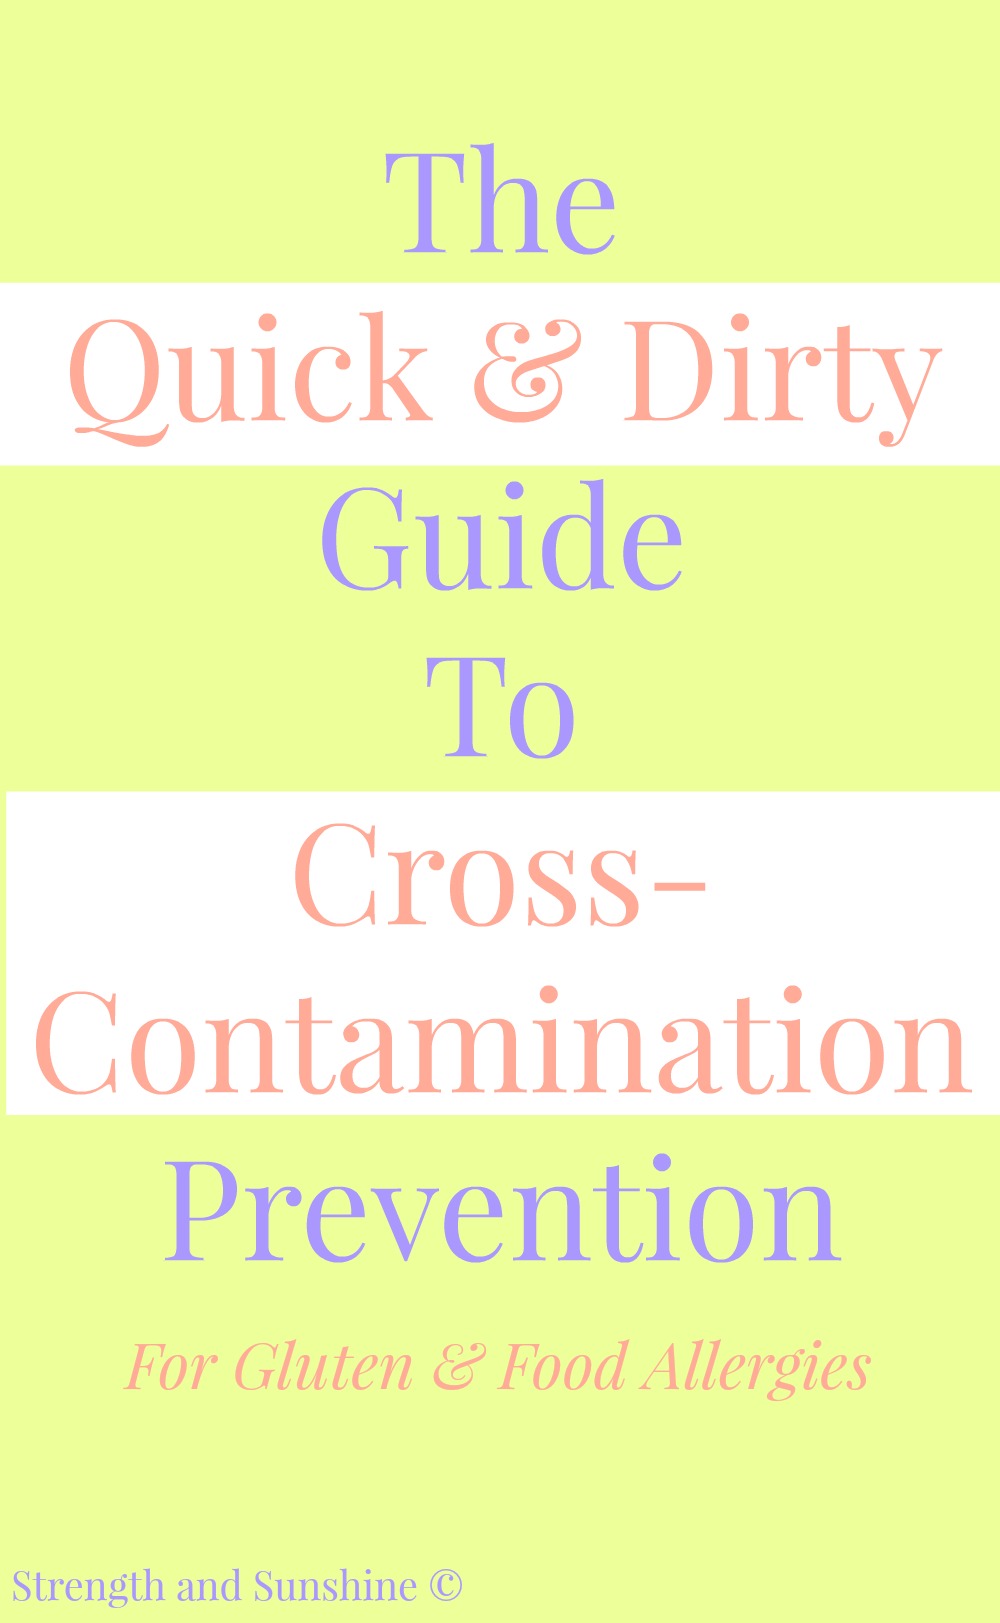 The Quick & Dirty Guide To Cross-Contamination Prevention | Strength and Sunshine @RebeccaGF666 It's more than just switching your diet. When it comes to Celiac Disease and food allergies, cross-contamination prevention must take number one importance. Here is the quick and "dirty" guide to keeping things safe (gluten-free, dairy-free, egg-free, nut-free, soy-free, fish-free, peanut-free, etc.)!